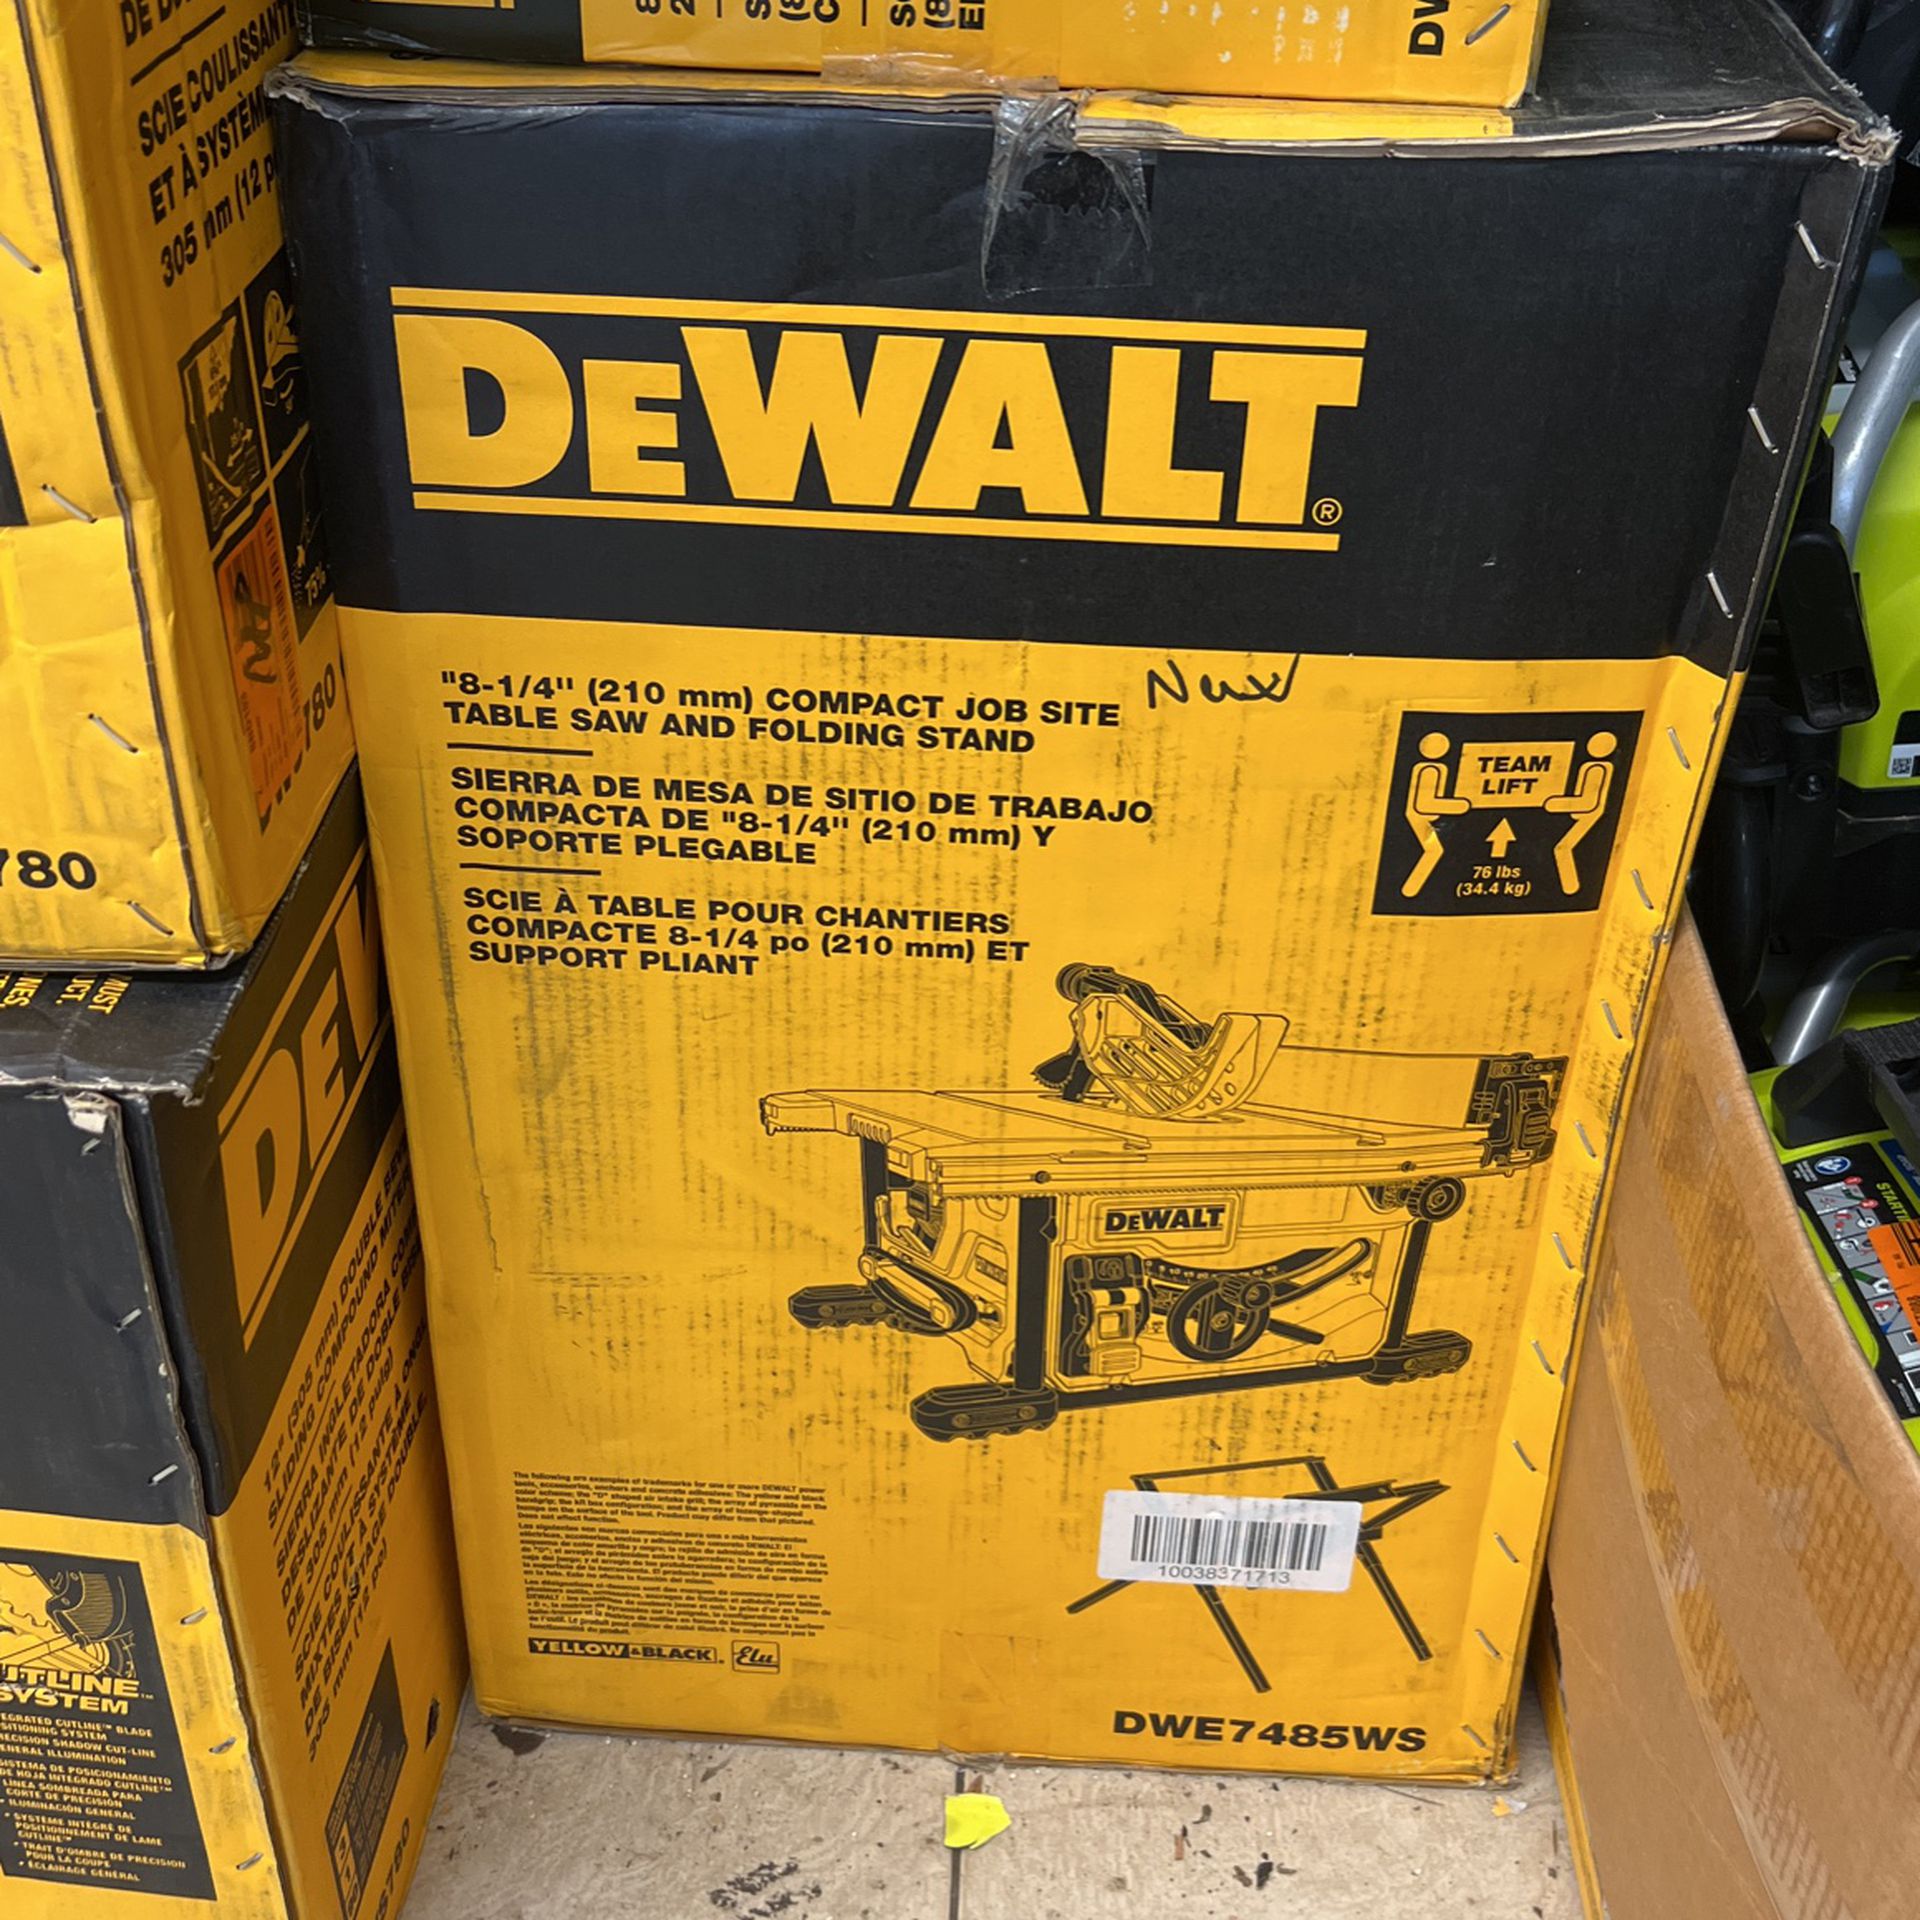 Dewalt 15 Amp Corded 8-1/4 in. Compact Jobsite Tablesaw with Compact Table Saw Stand